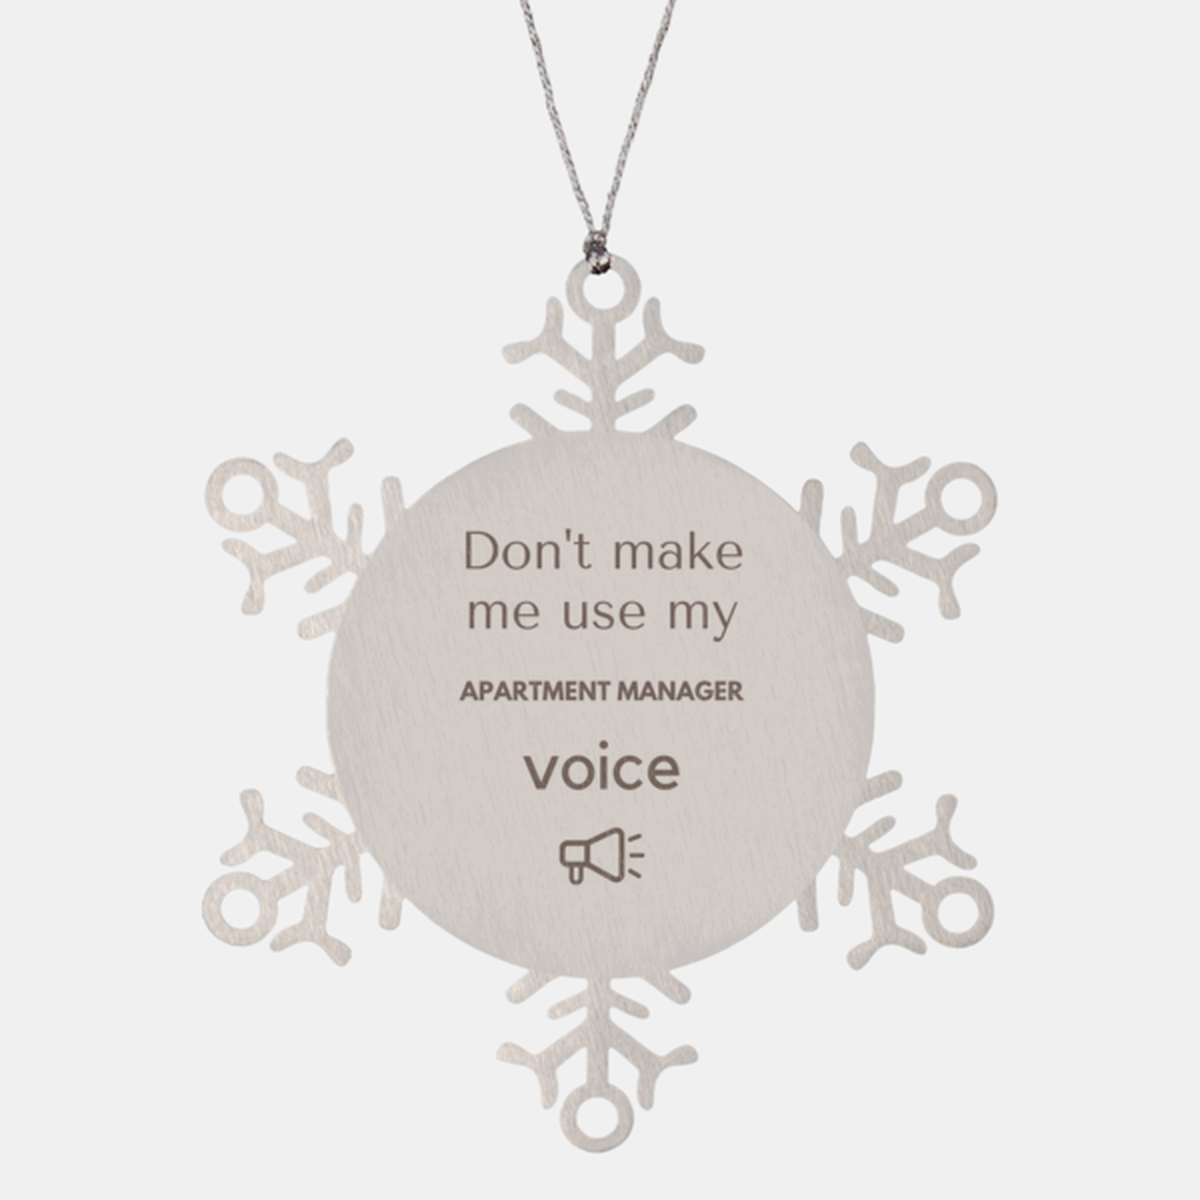 Don't make me use my Apartment Manager voice, Sarcasm Apartment Manager Ornament Gifts, Christmas Apartment Manager Snowflake Ornament Unique Gifts For Apartment Manager Coworkers, Men, Women, Colleague, Friends